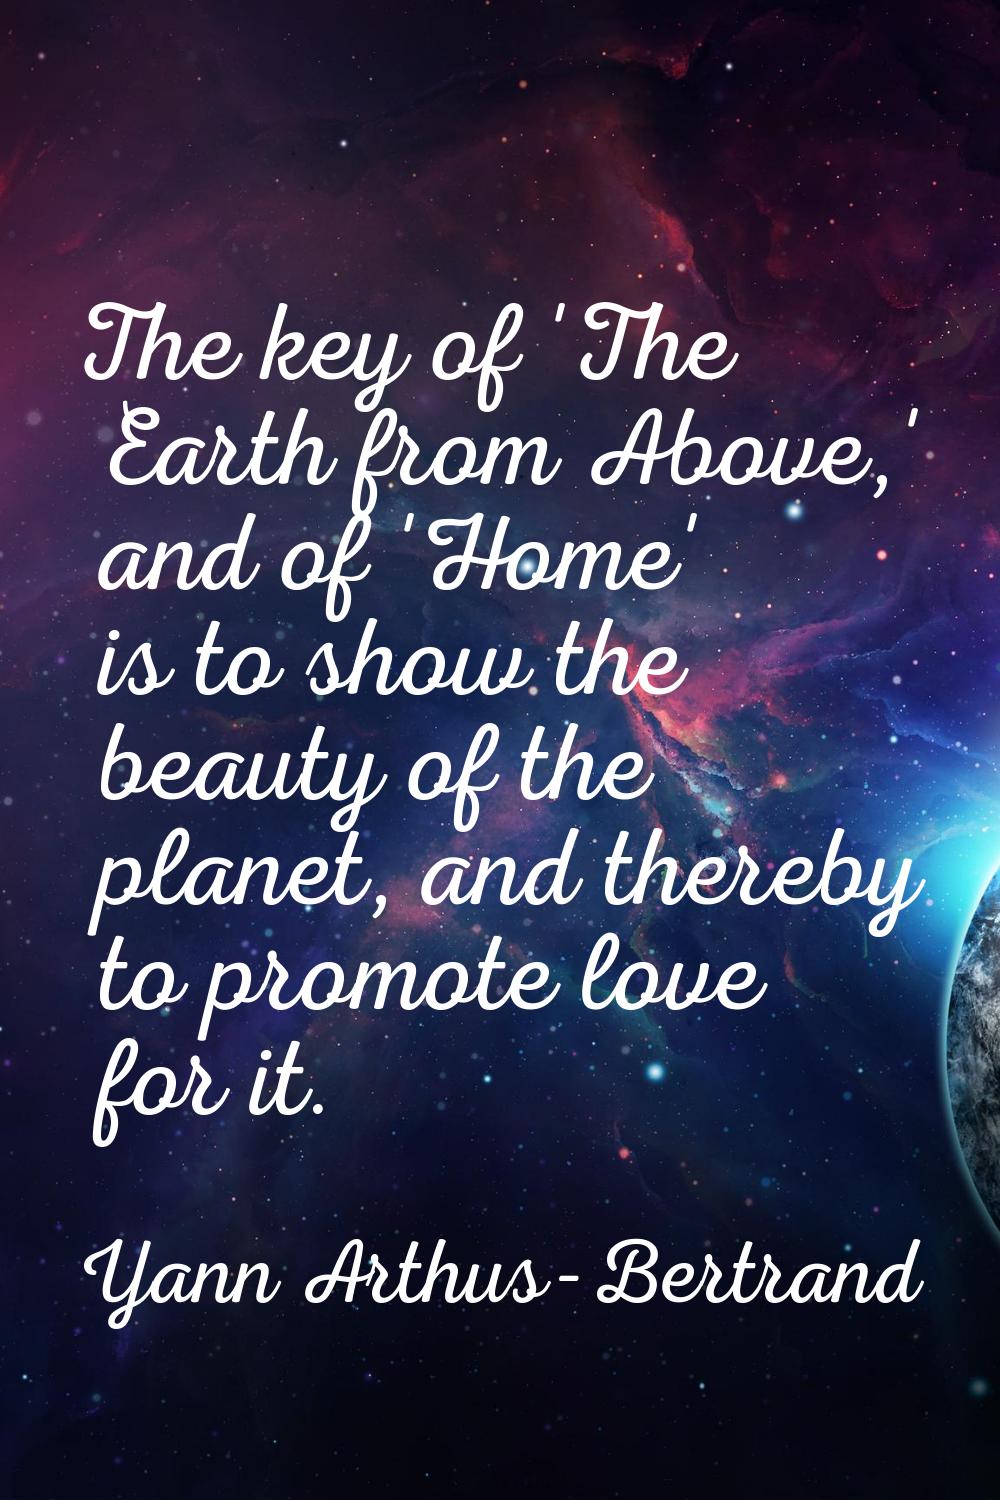 The key of 'The Earth from Above,' and of 'Home' is to show the beauty of the planet, and thereby t